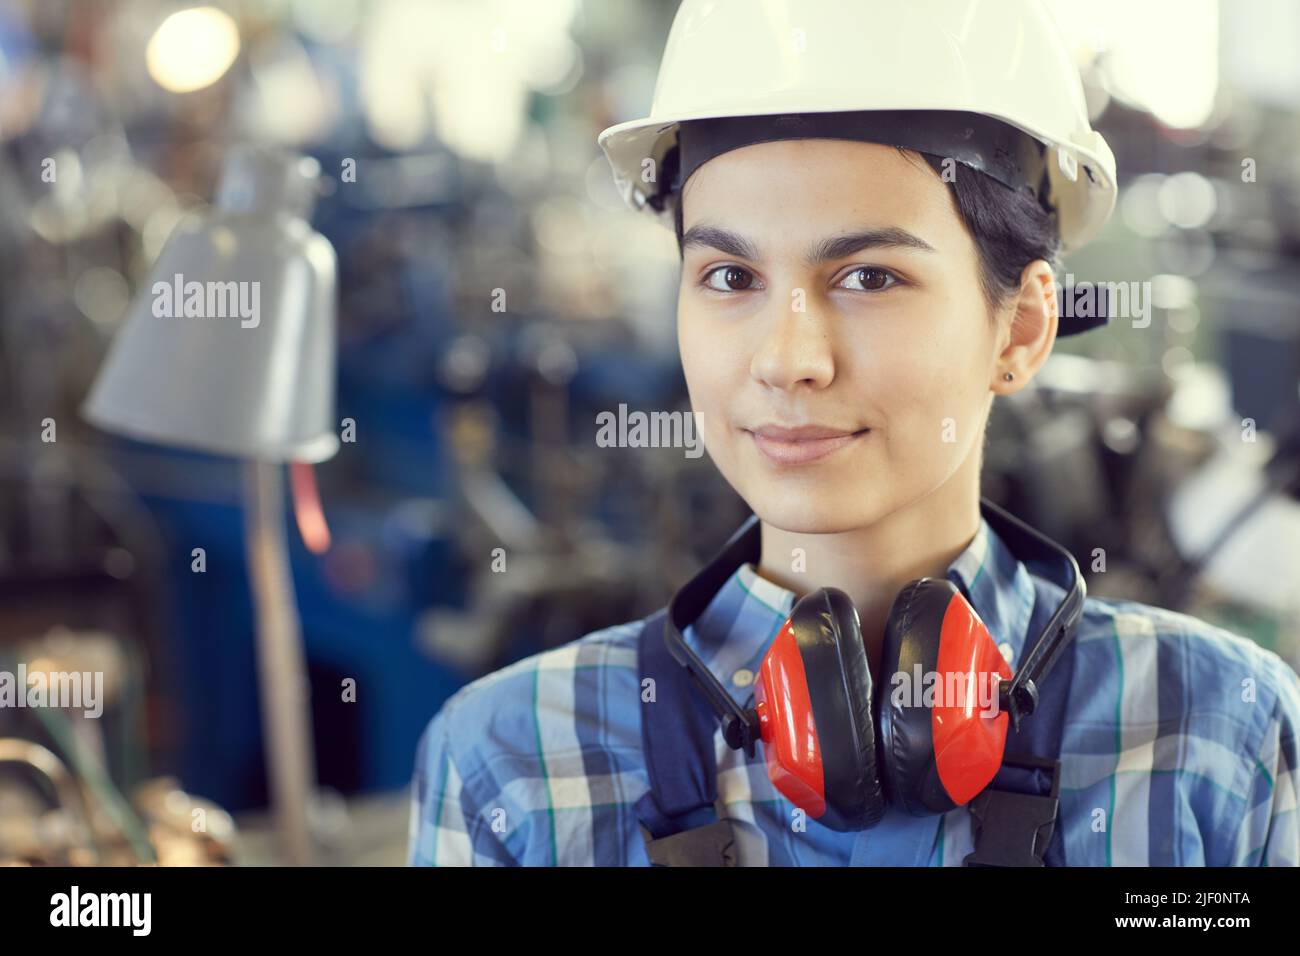 Portrait of smiling tomboy wearing hardhat and ear protectors standing at factory shop Stock Photo